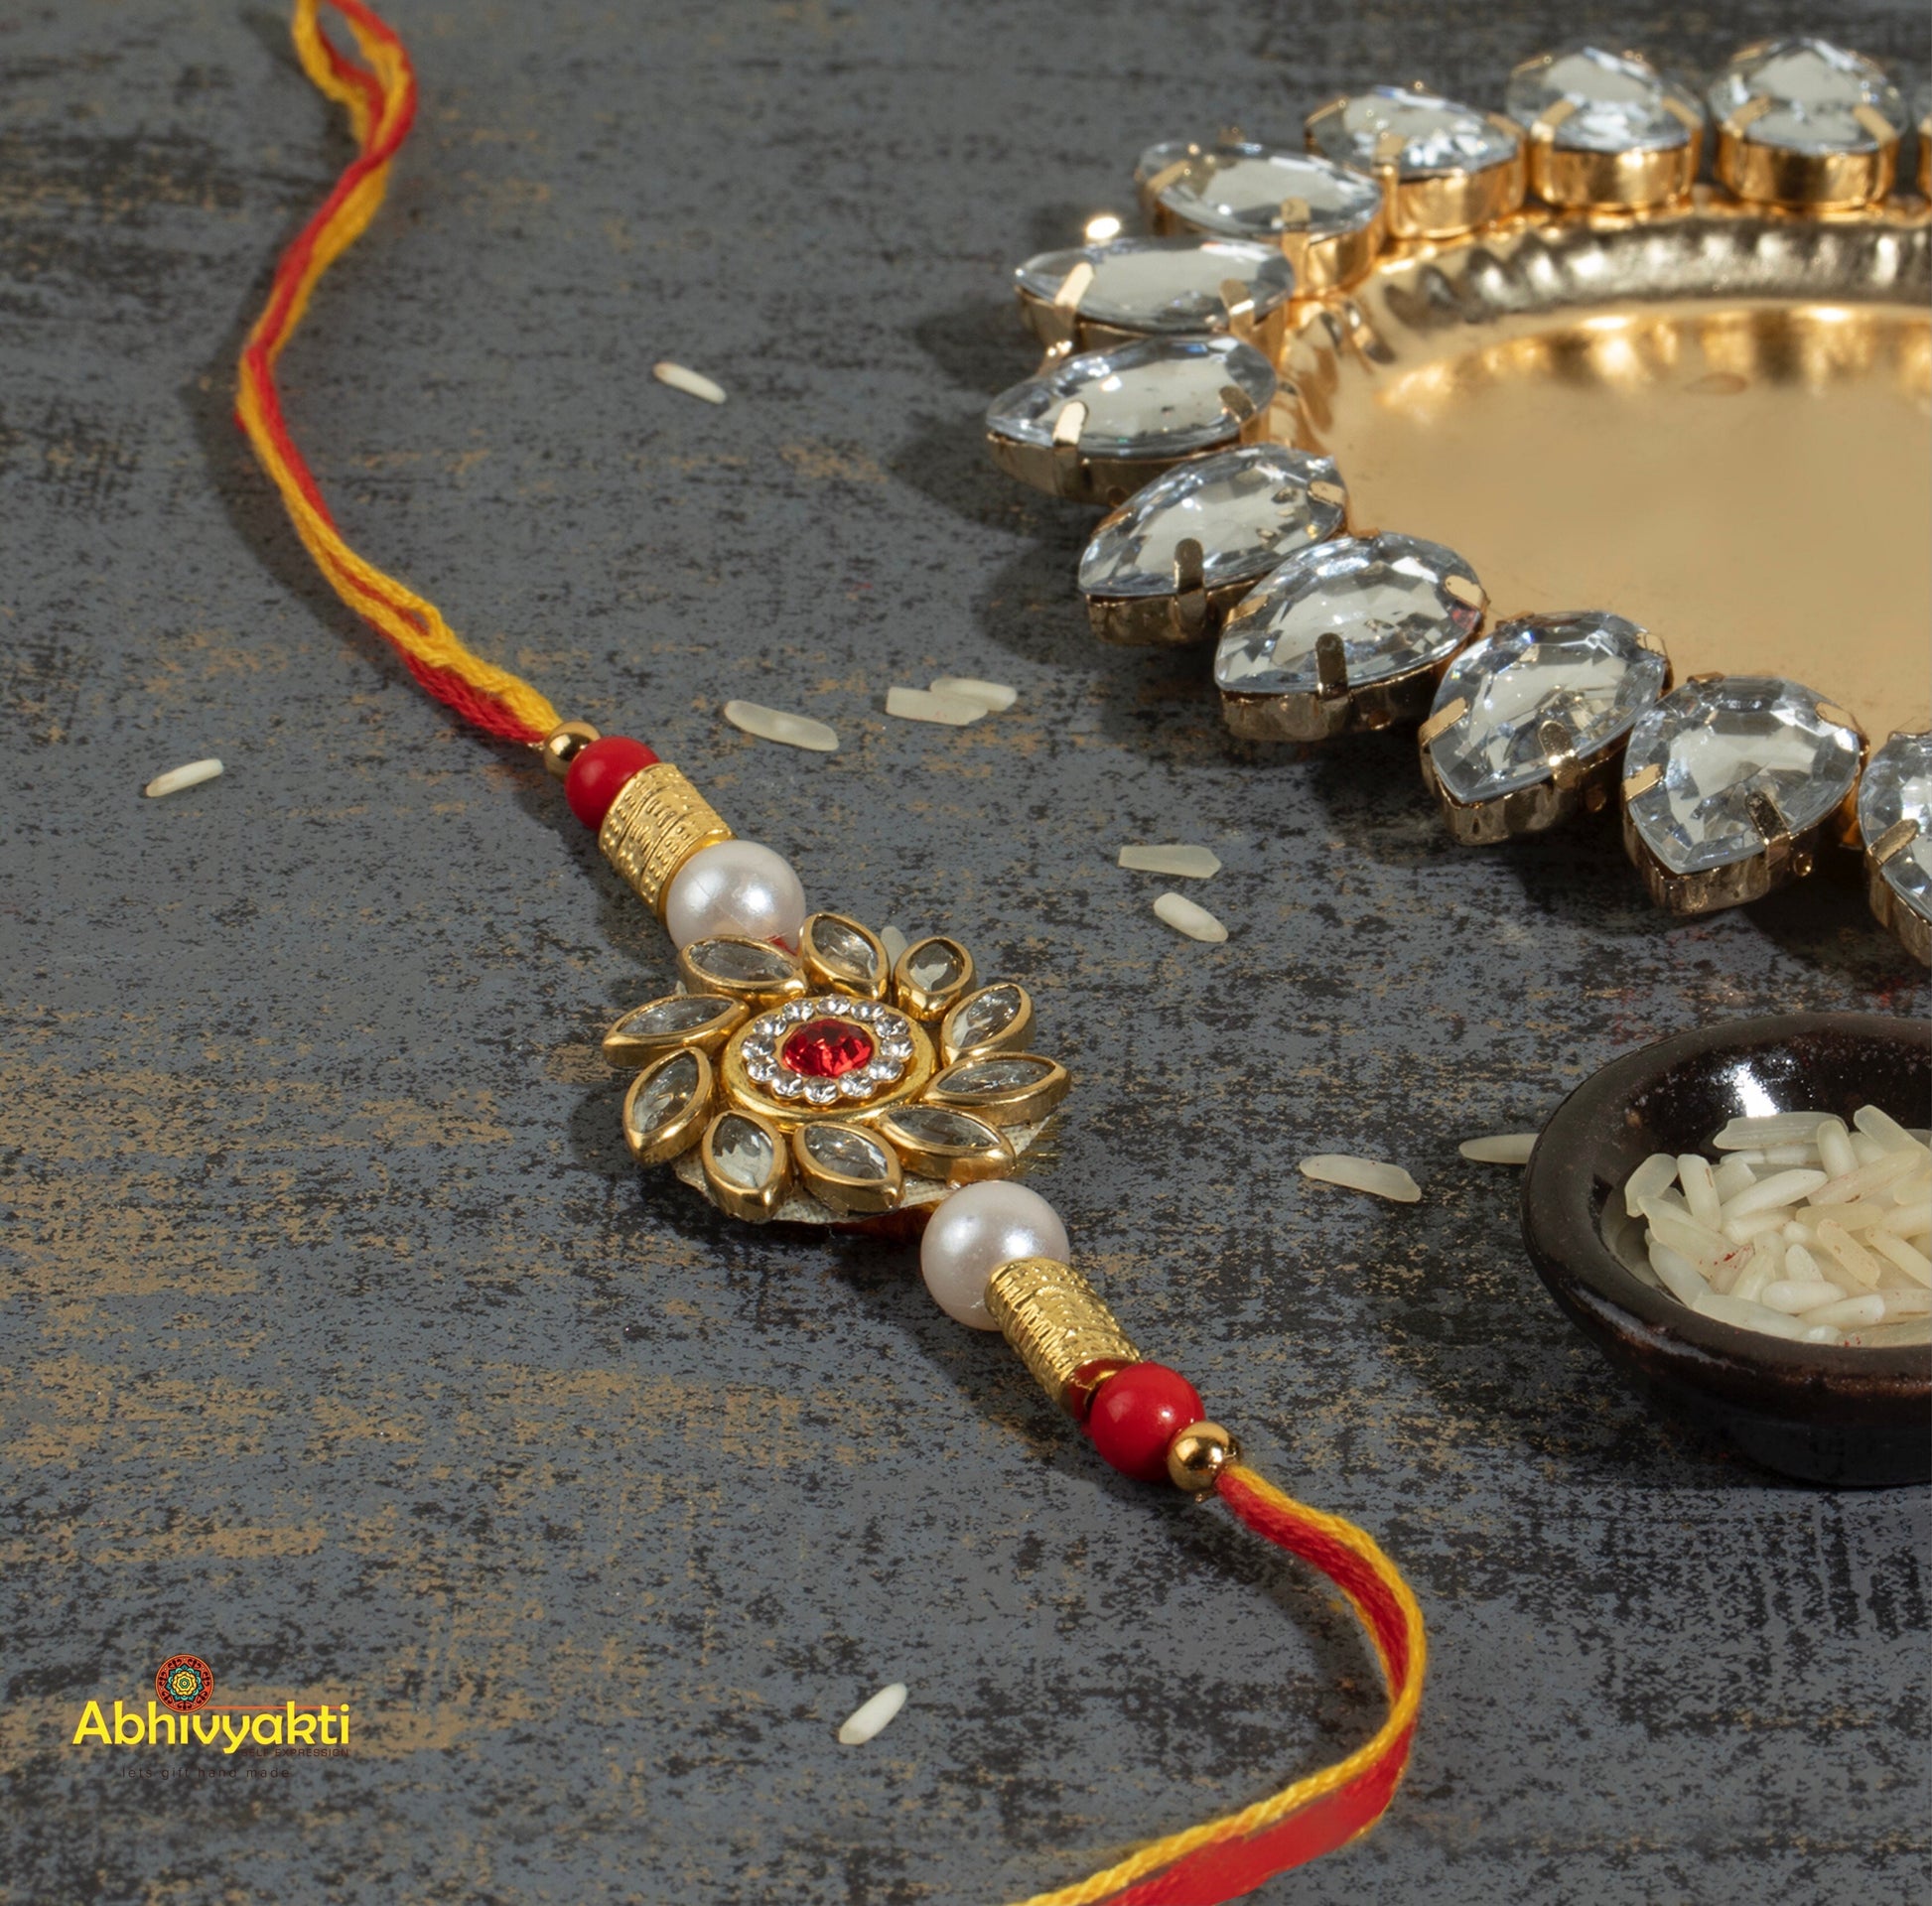 Gold and pearl kundan rakhi with red and white beads, adorned with kundan stone rakhi and beautiful beads.